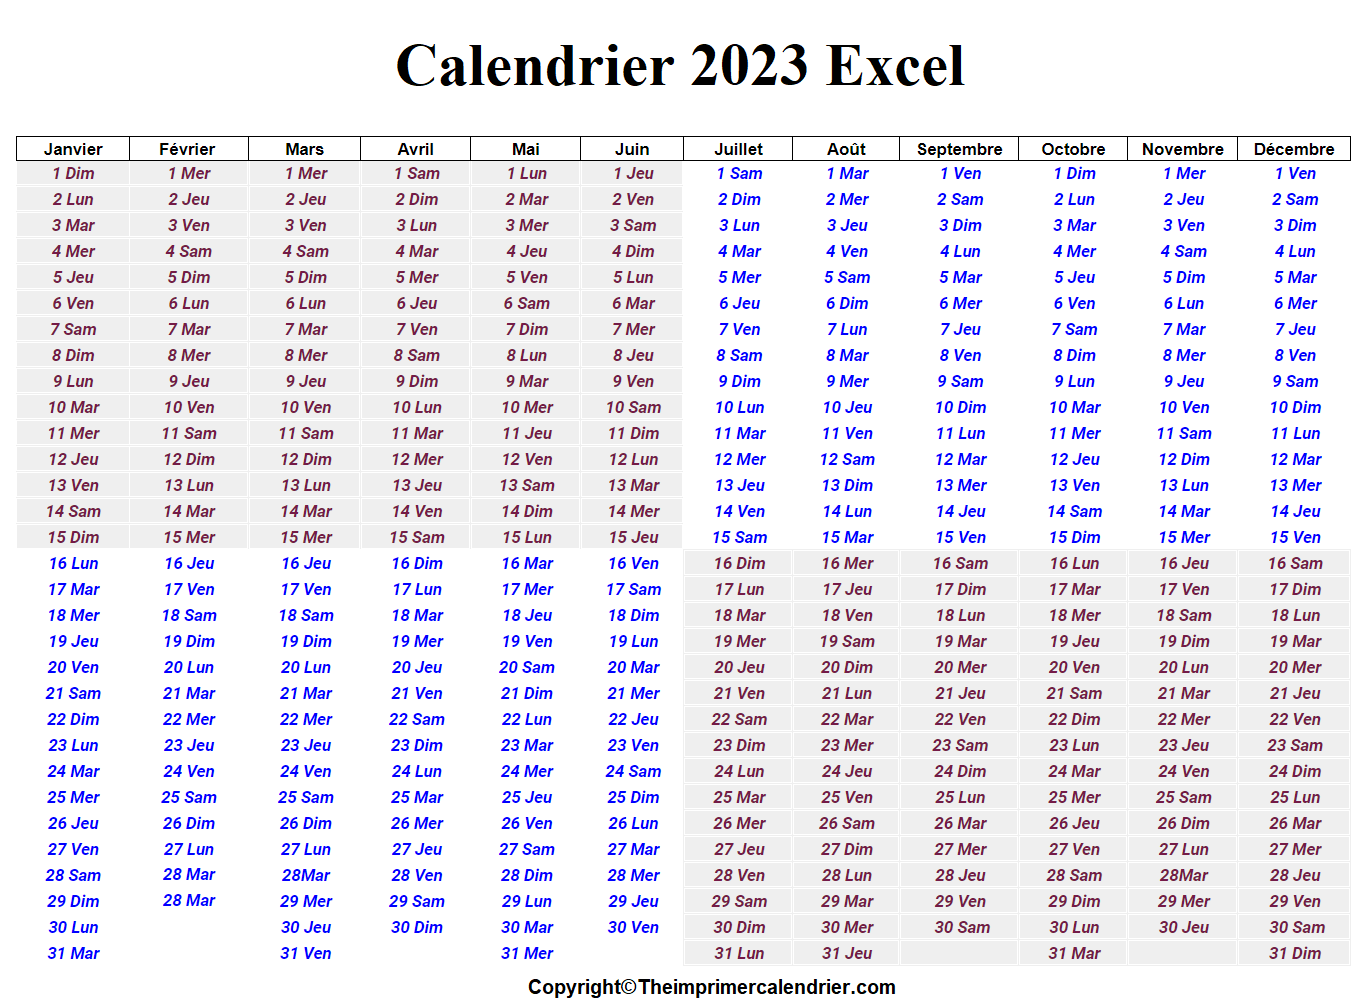 Calendrier Excel 2023